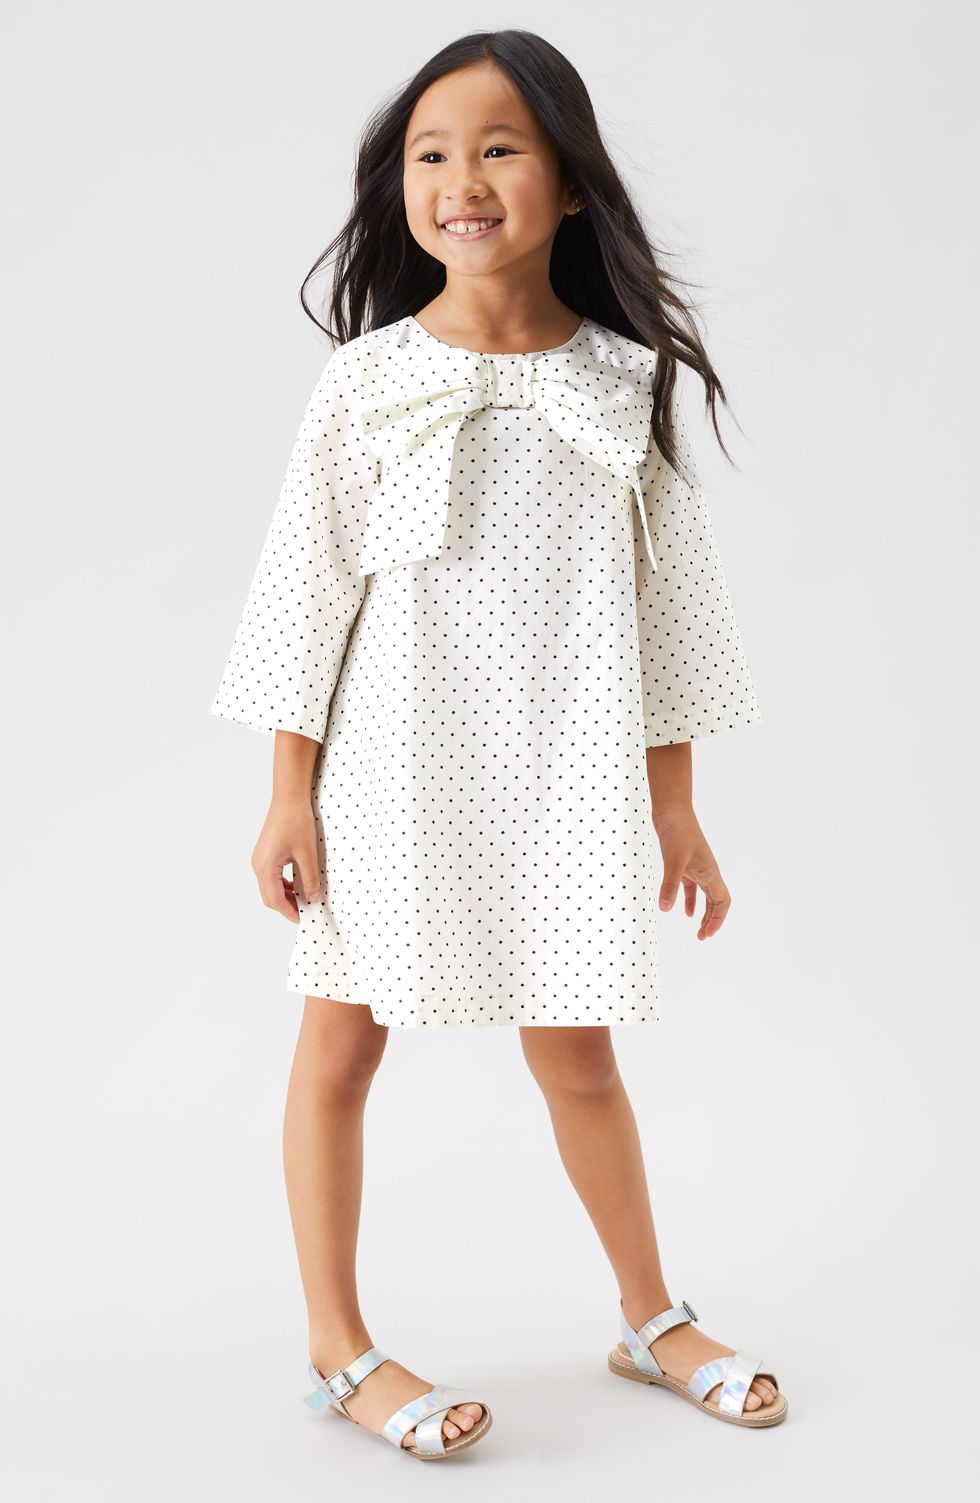 Statement Bow Dress in Toddler, Little Girl, and Big Girl Sizes